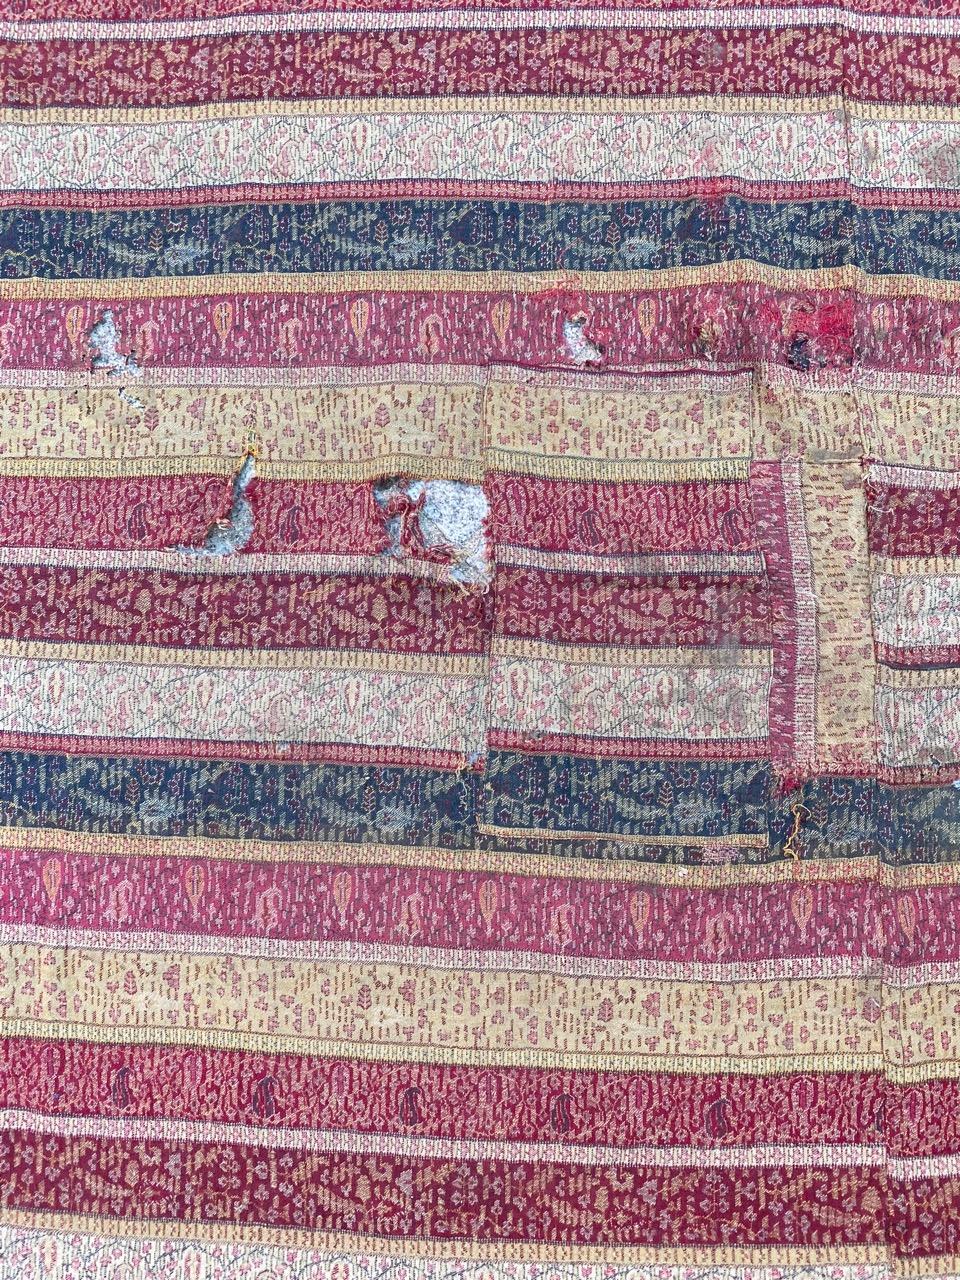 Beautiful 19th century Kashmir bayadir shawl with nice design and beautiful natural colors, entirely hand embroidered with wool and silk on wool foundation.

✨✨✨
